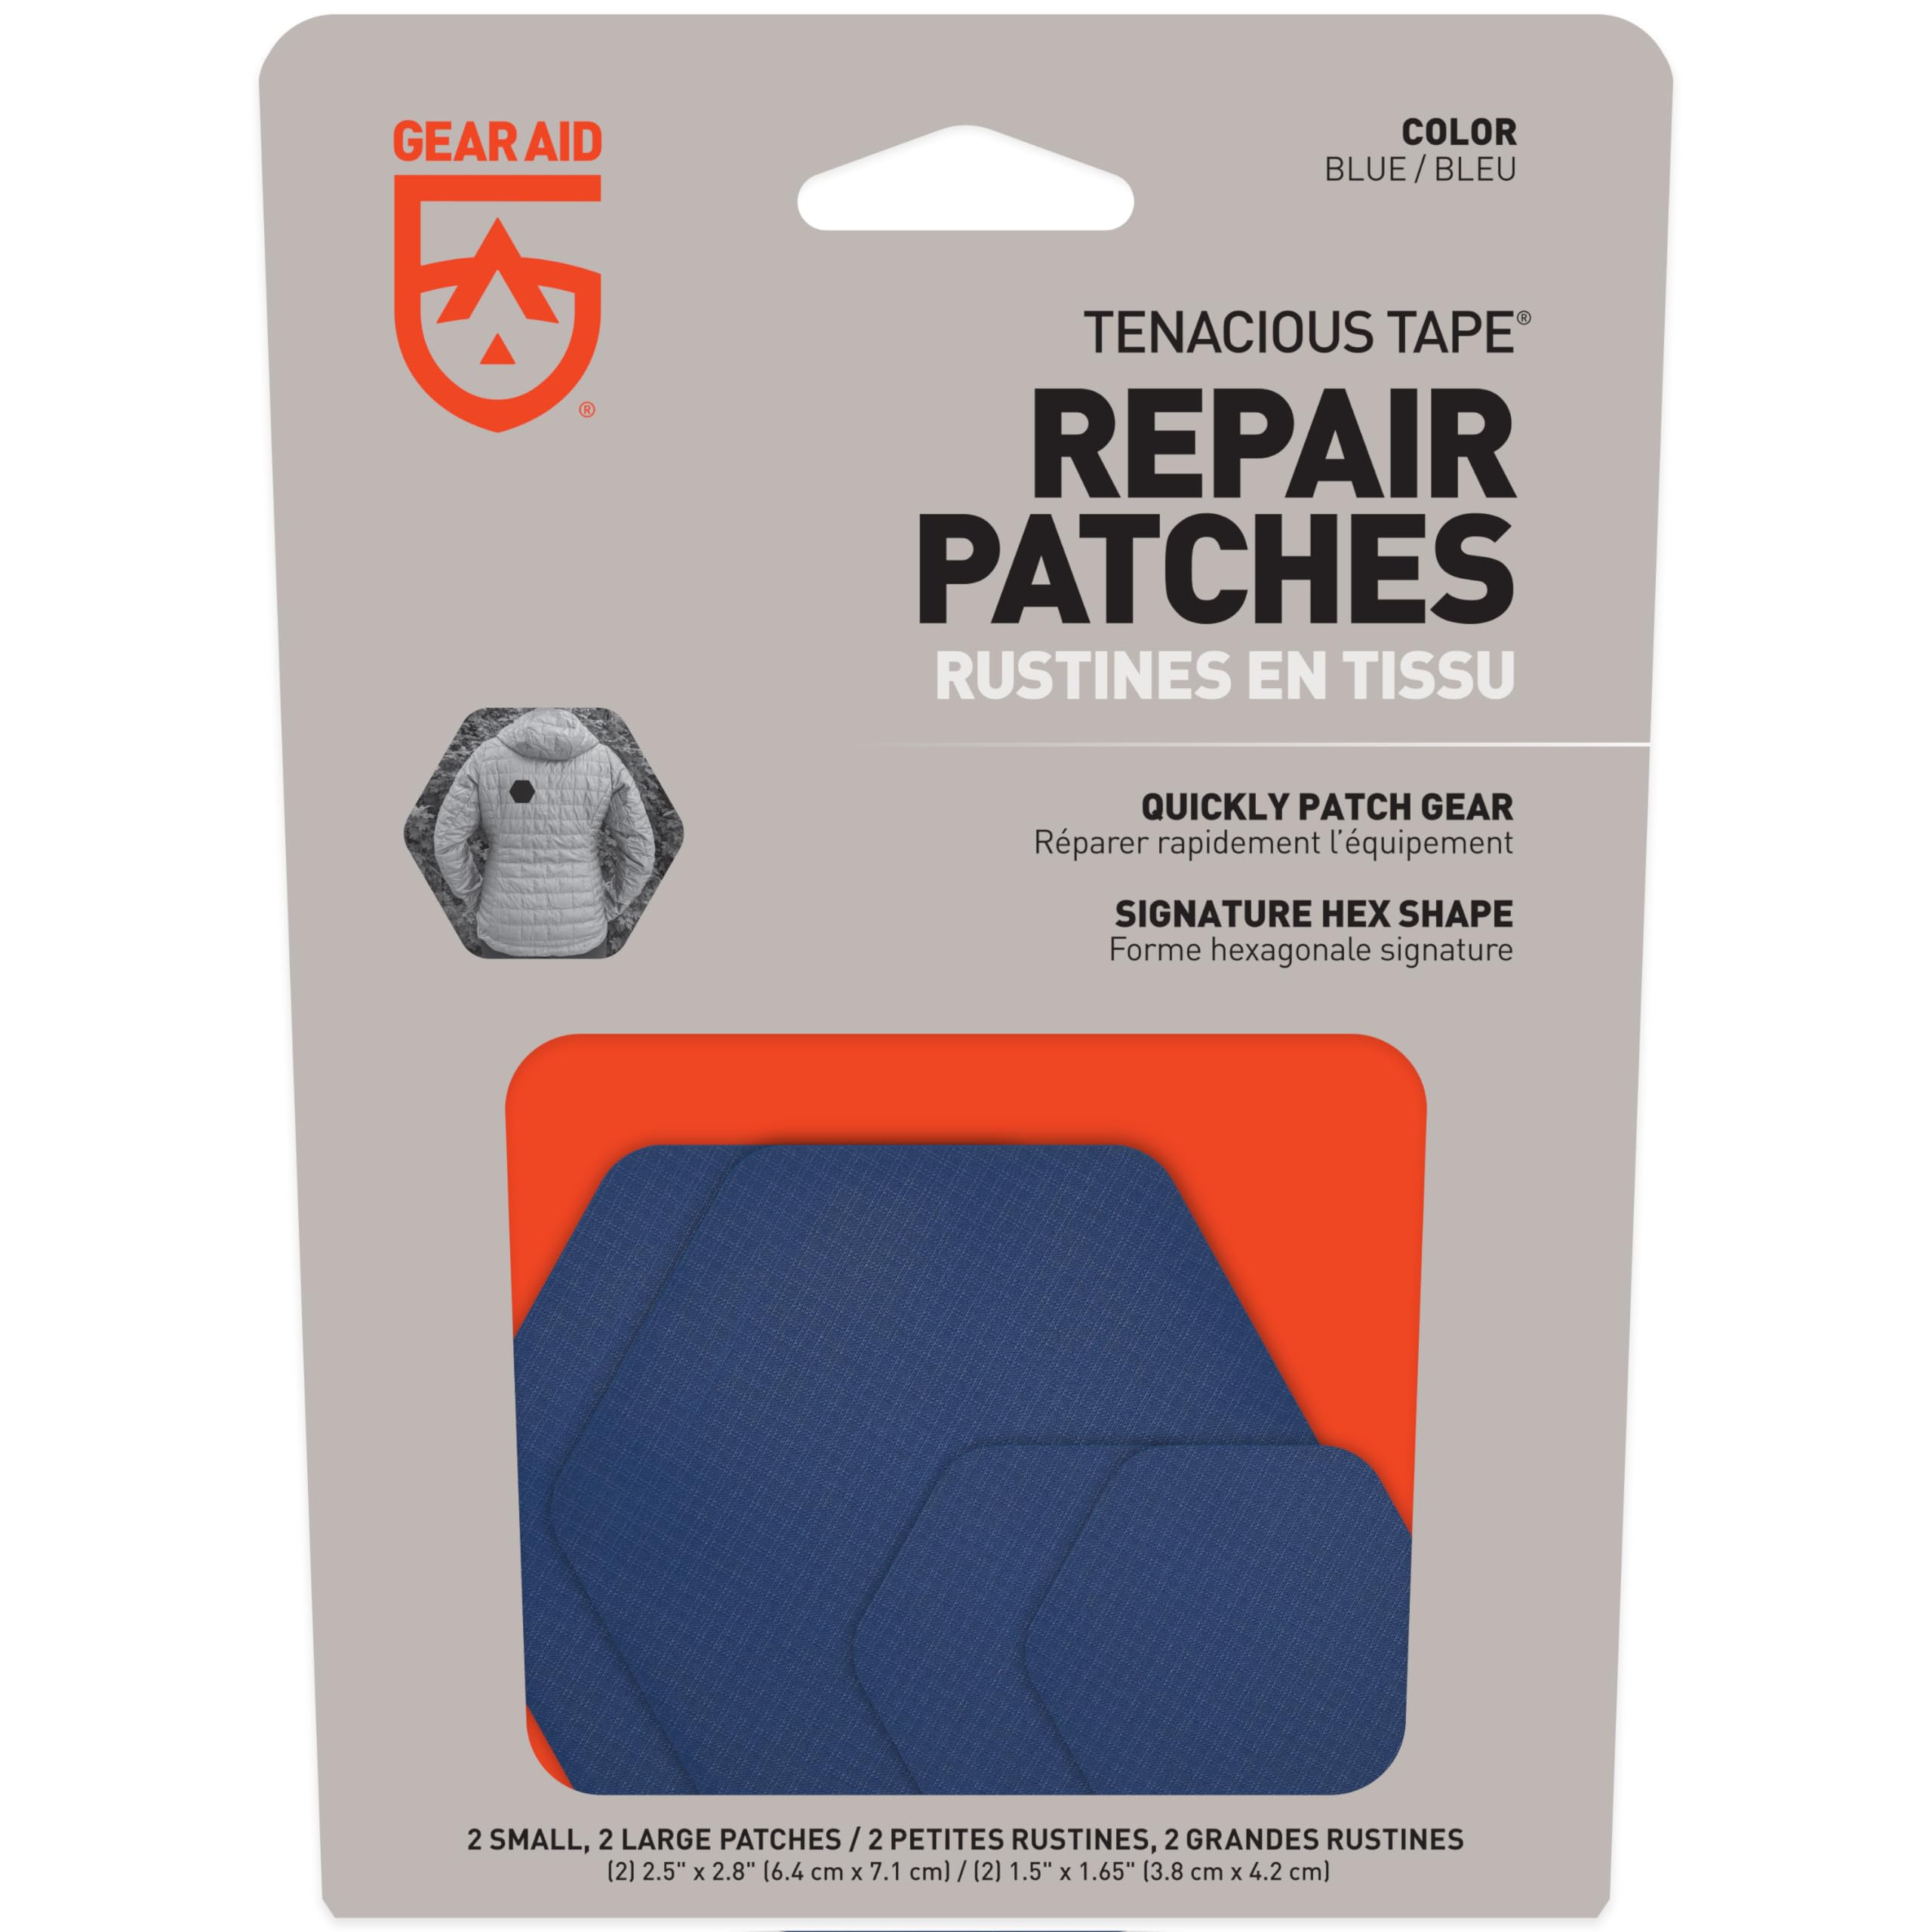 GEAR AID Tenacious Tape Hex 2.5” and 1.5” Shapes, Micro-Ripstop Outdoor Fabric Repair Patches, Peel-and-Stick to Fix Holes and Burns in Down Jackets, Rain Gear, Tents, Tarps and More, Blue, 4 Patches